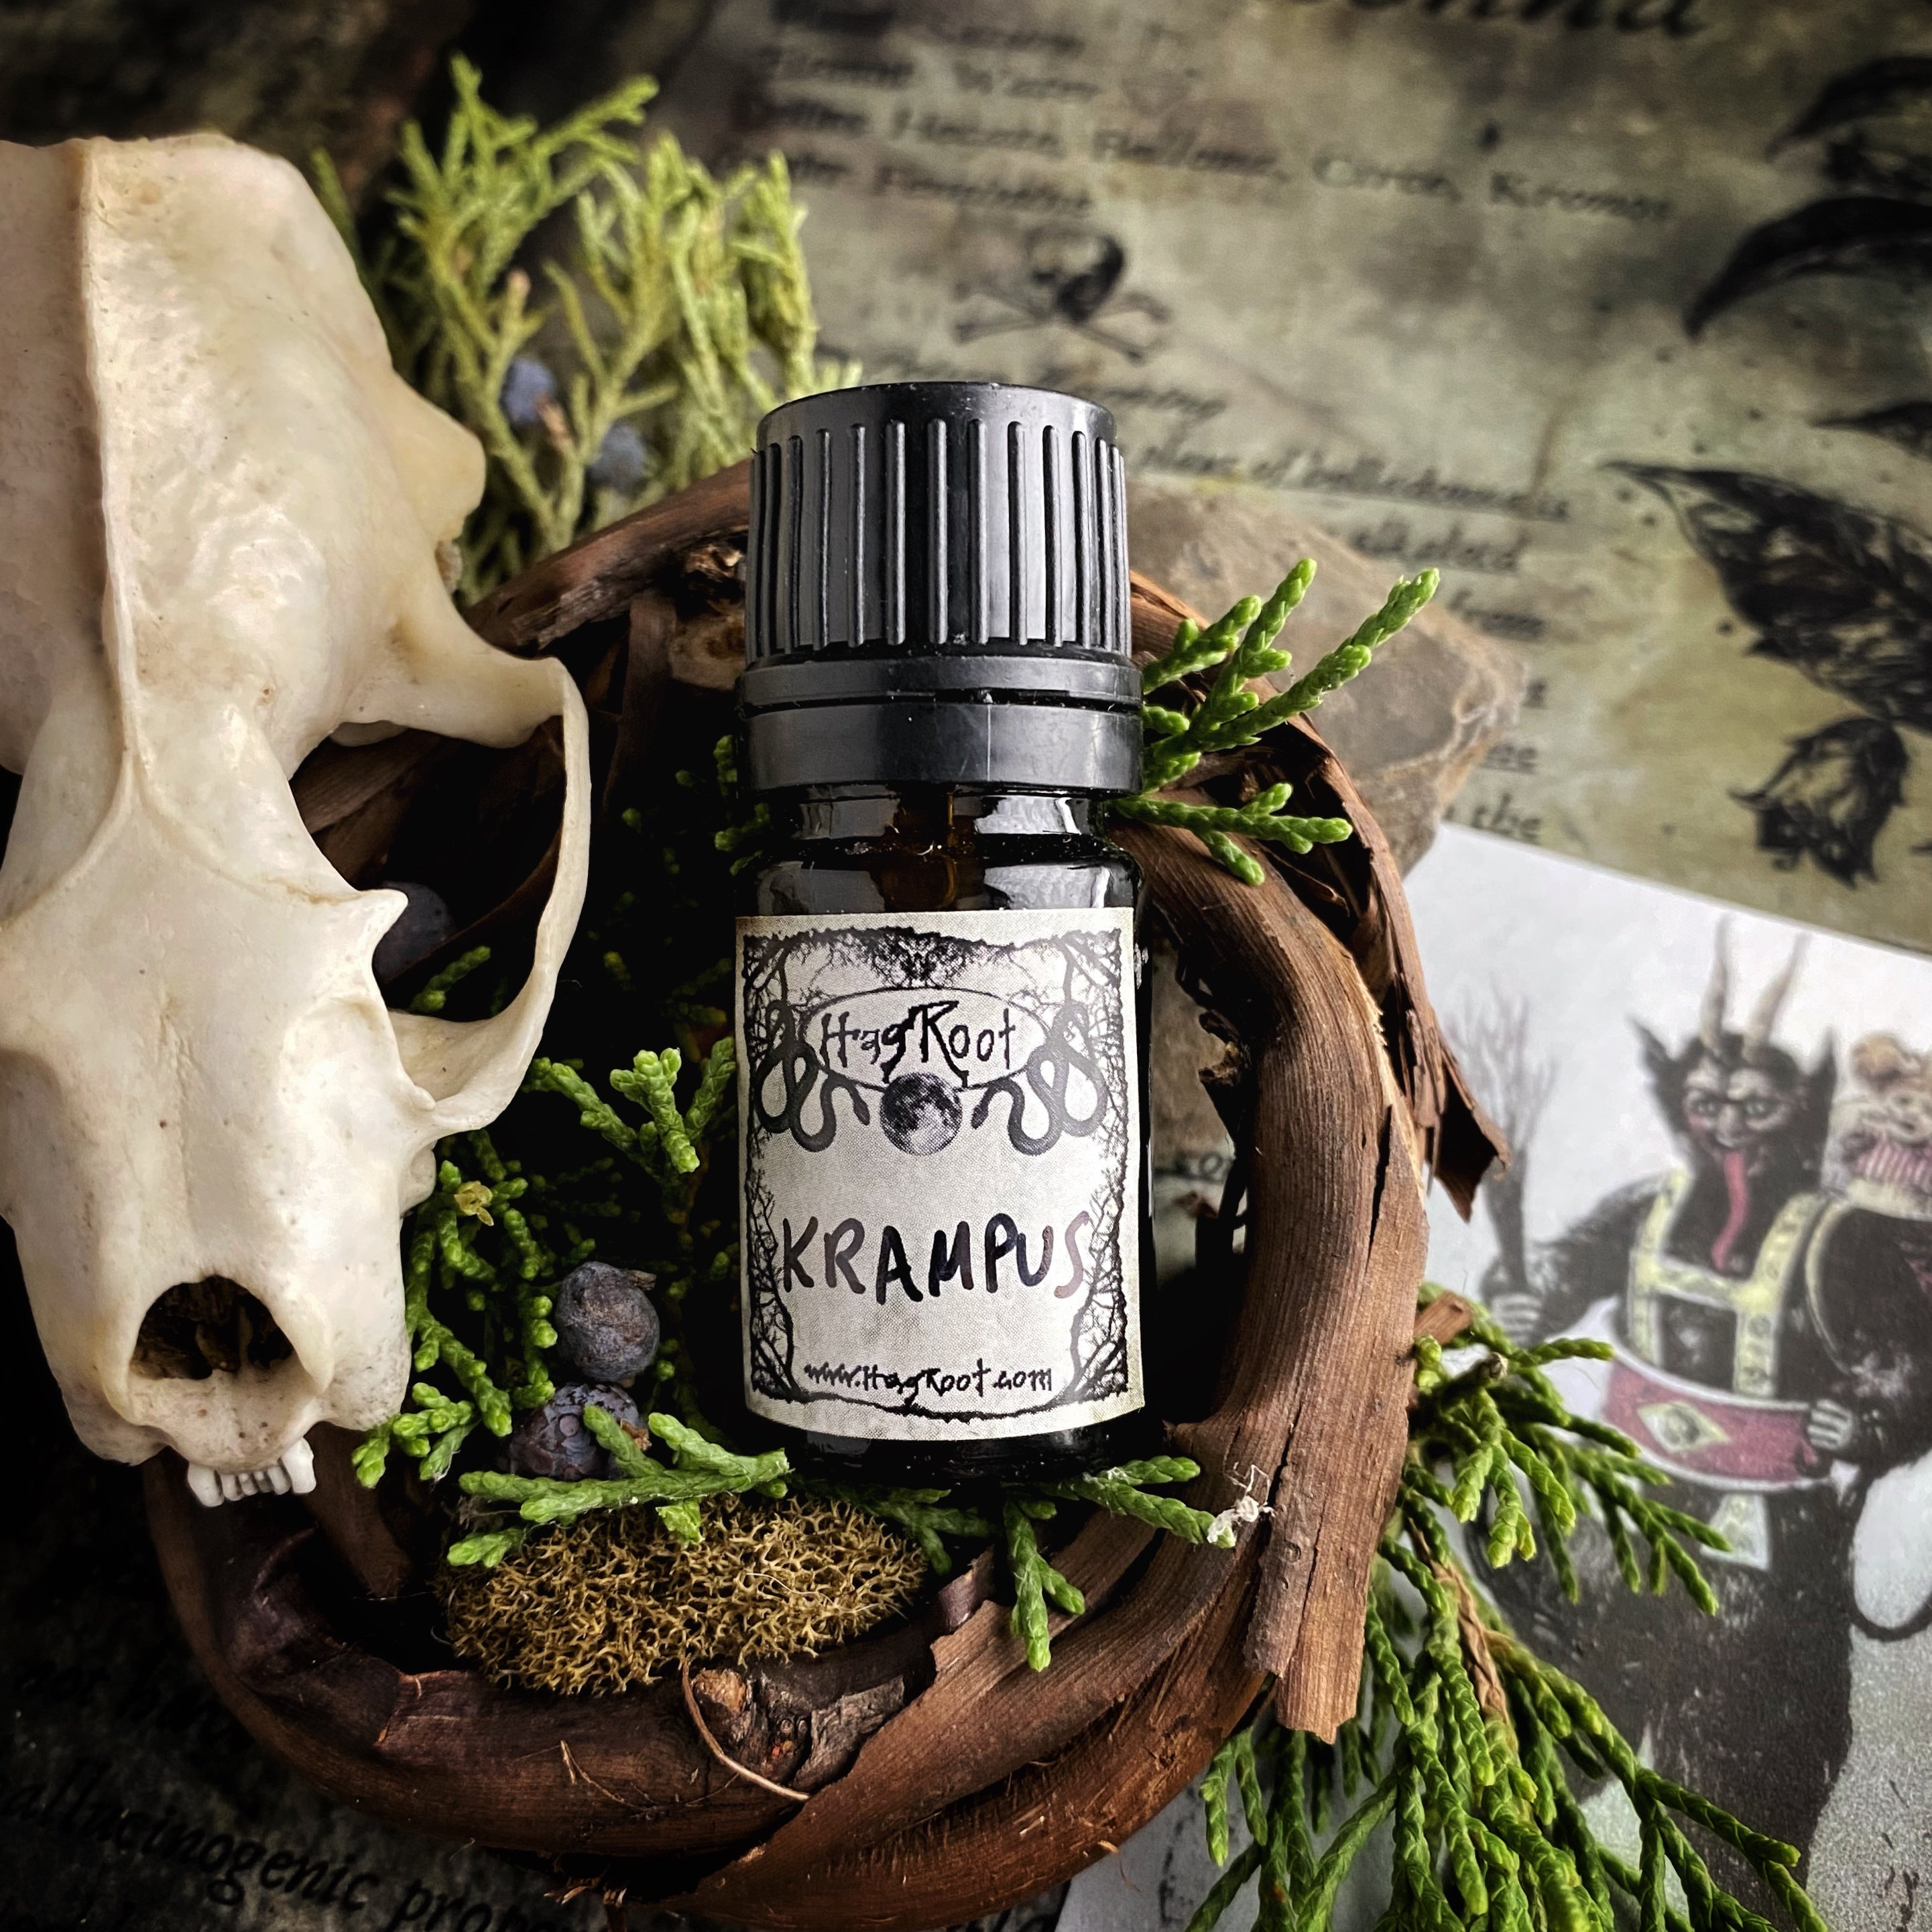 KRAMPUS-(Pine, Leather, Fir, Cedar, Cinnamon, Patchouli, Holly, Vetiver, Black Pepper, Musk)-Perfume, Cologne, Anointing, Ritual Oil